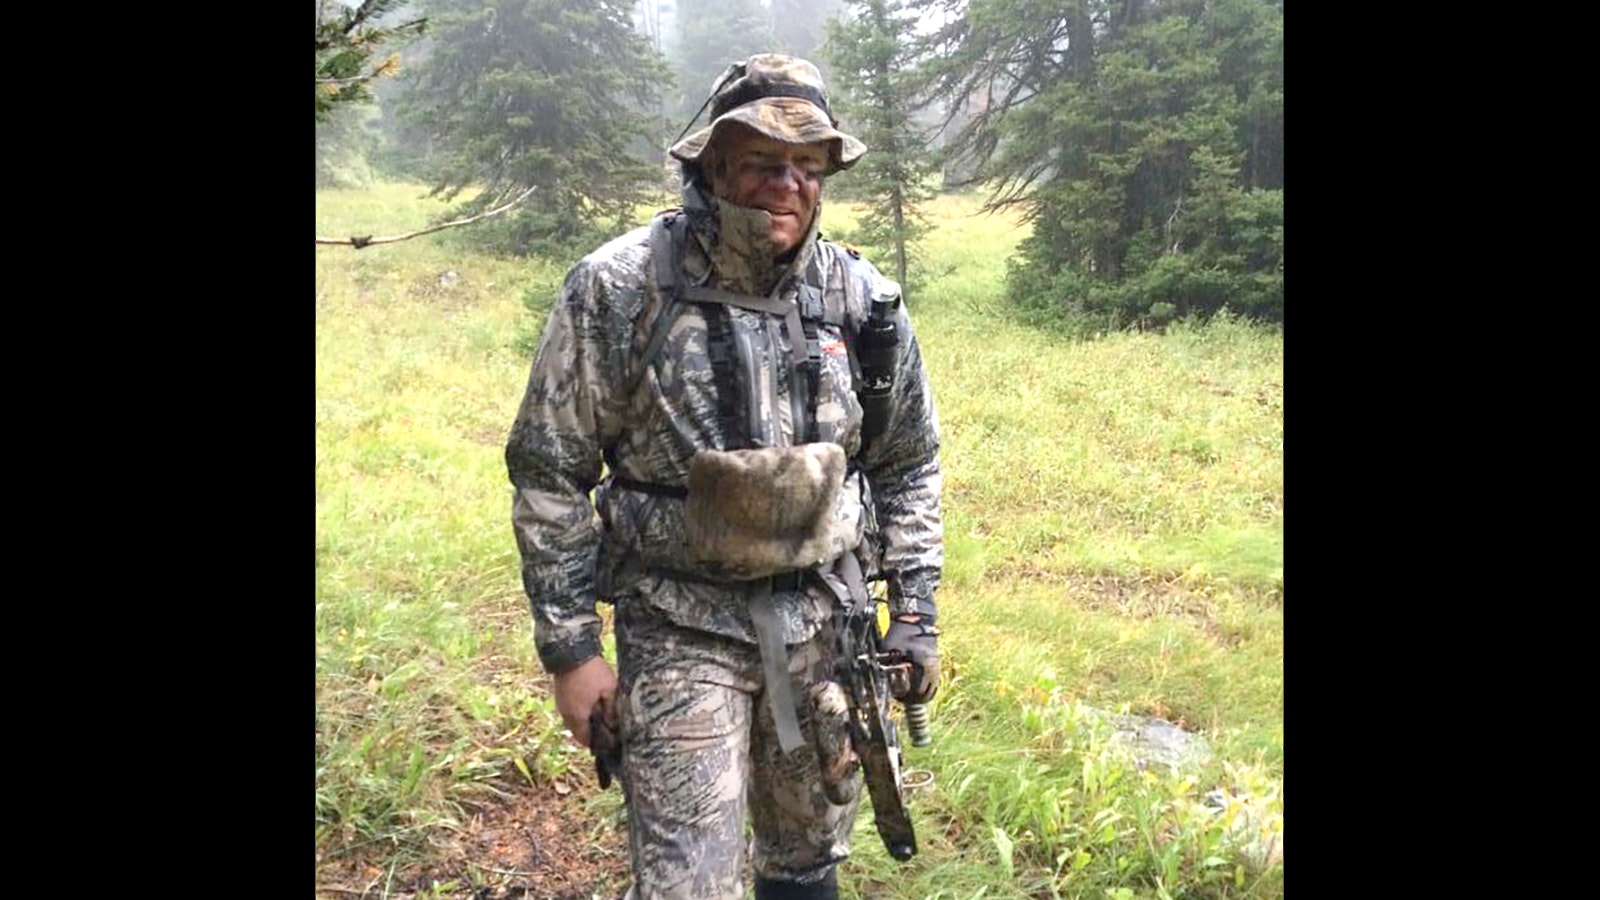 Greg Weatherby has hunted in grizzly country in the Greater Yellowstone Ecosystem for decades. He said to avoid run-ins with bears, hunters must be constantly aware of their surroundings and cautious about where they go.